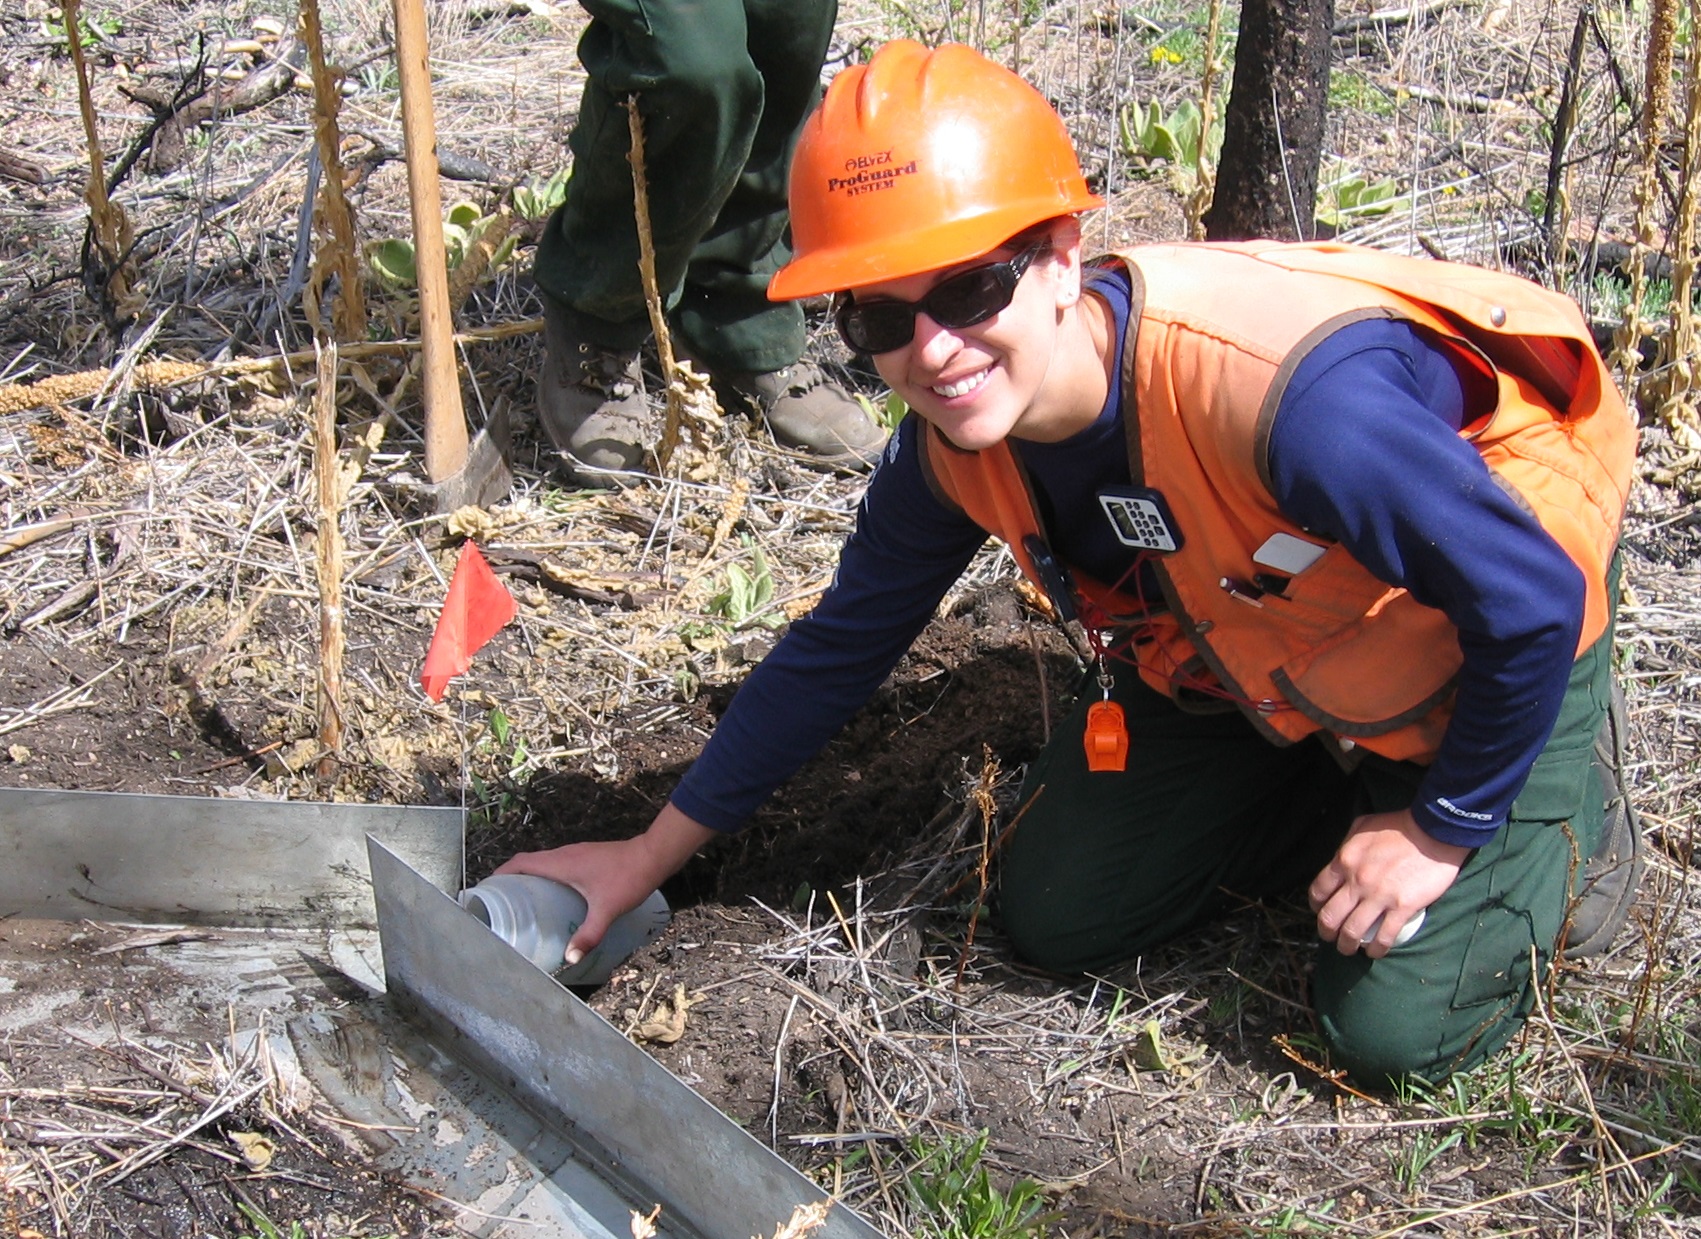 A picture showing a forest worker, wearing an orange hat and vest, working to build an erosion control barrier.